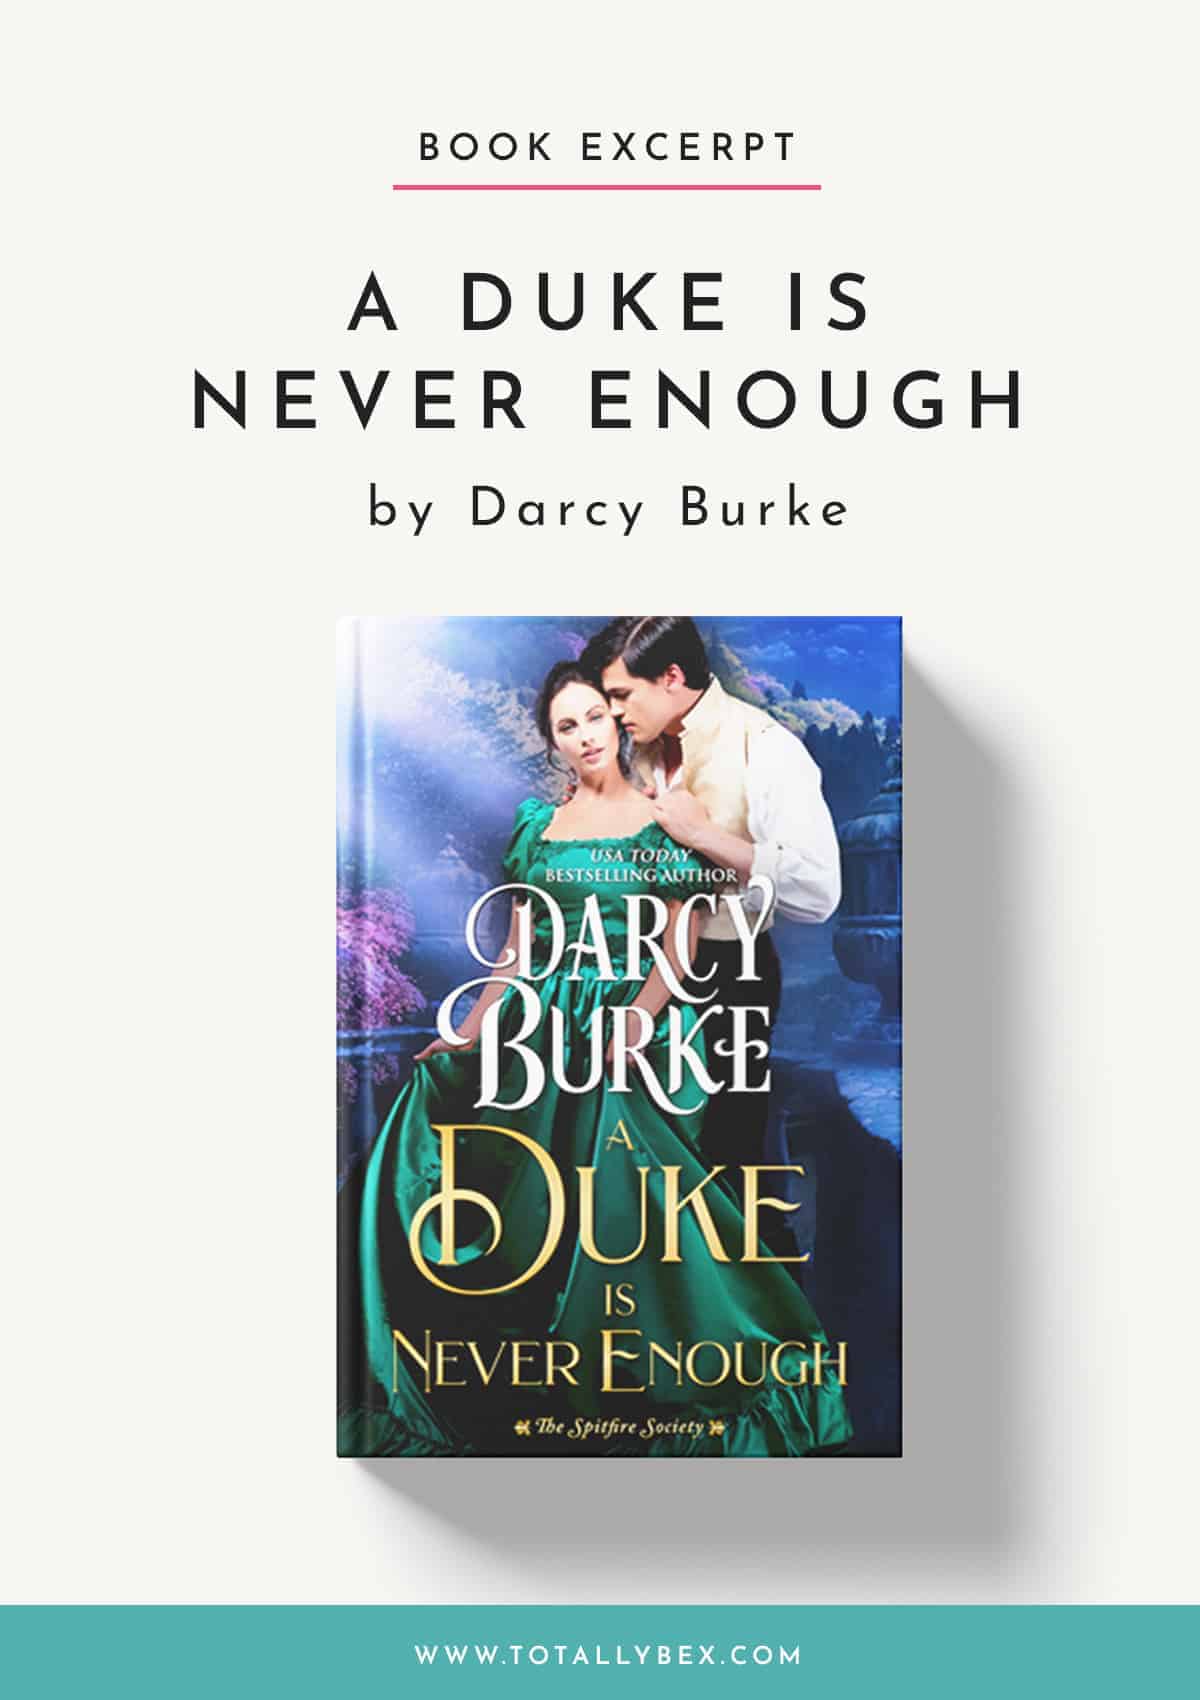 A Duke is Never Enough by Darcy Burke-Book Excerpt